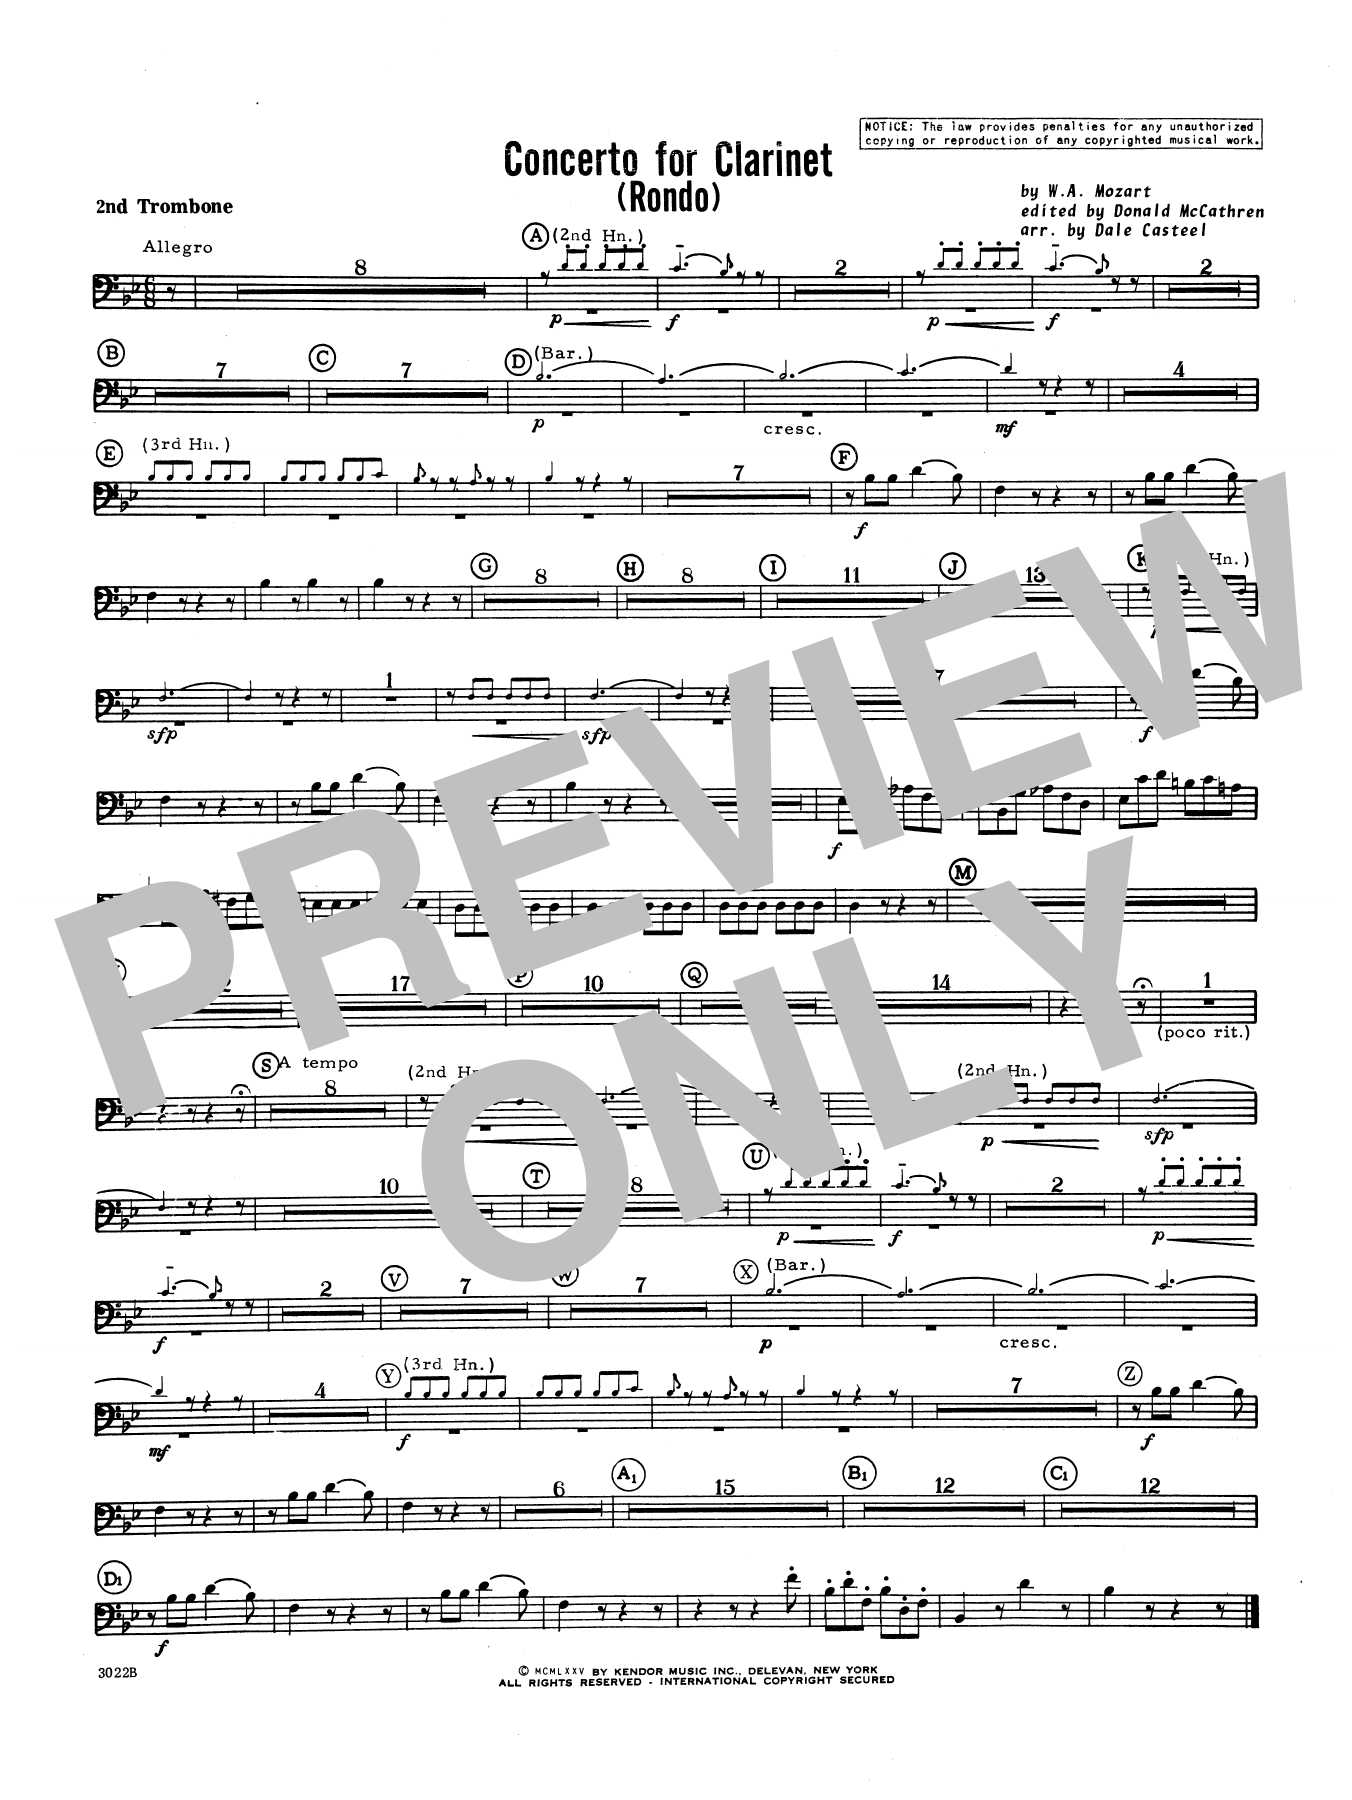 Download Donald McCathren and Dale Casteel Concerto For Clarinet - Rondo (3rd Move Sheet Music